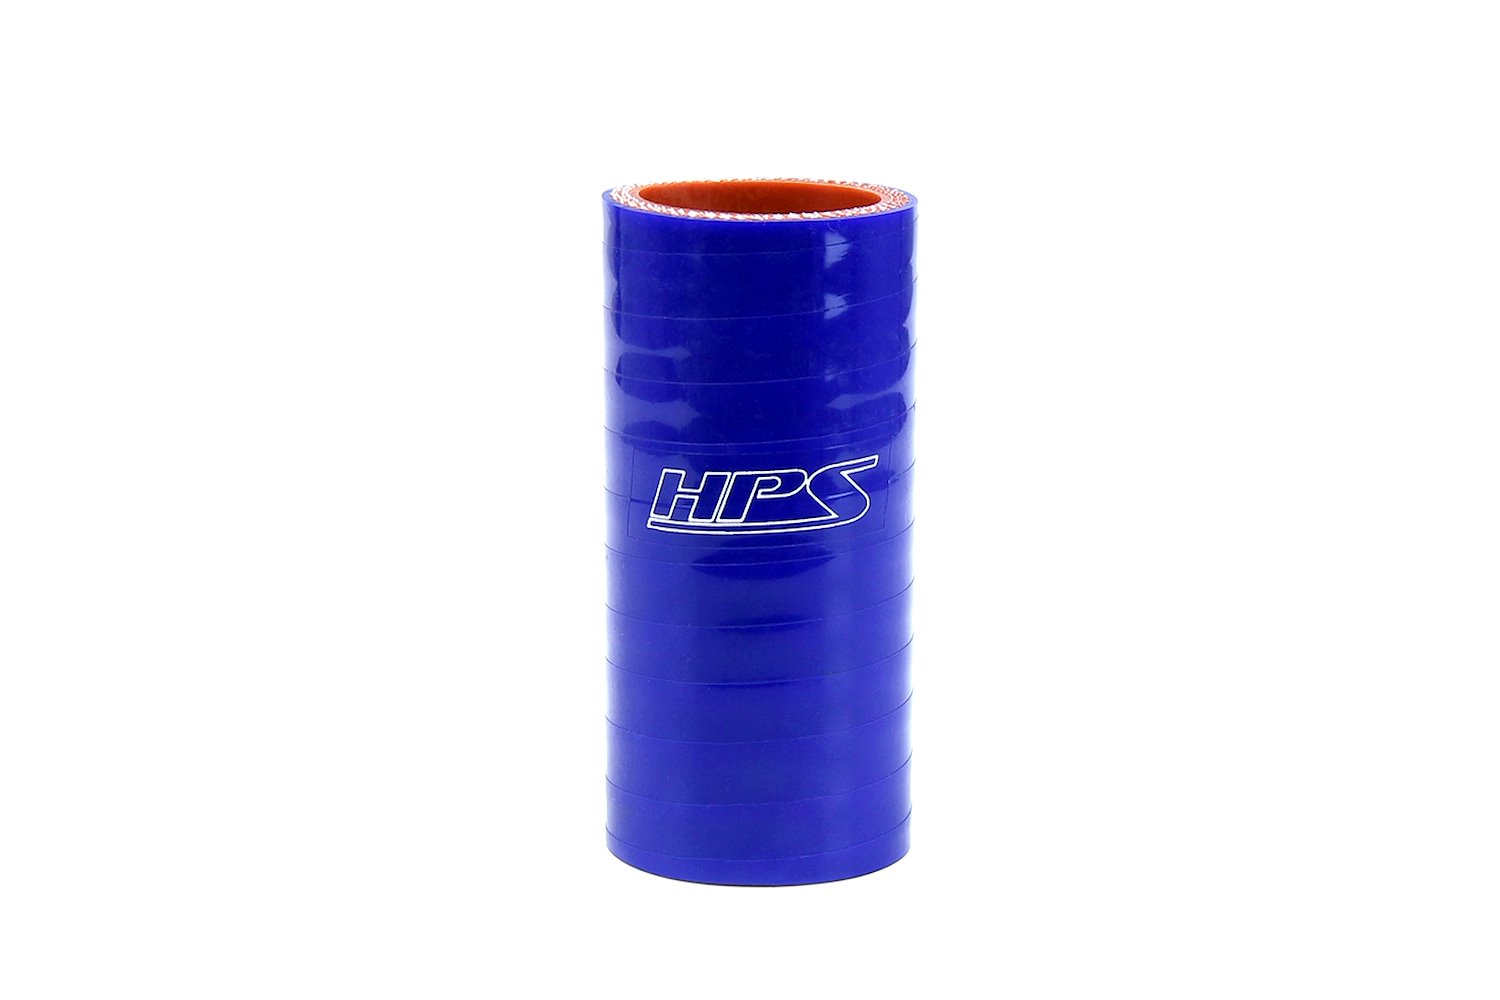 HTSC-125-L6-BLUE Silicone Coupler Hose, High-Temp 4-Ply Reinforced, 1-1/4 in. ID, 6 in. Long, Blue